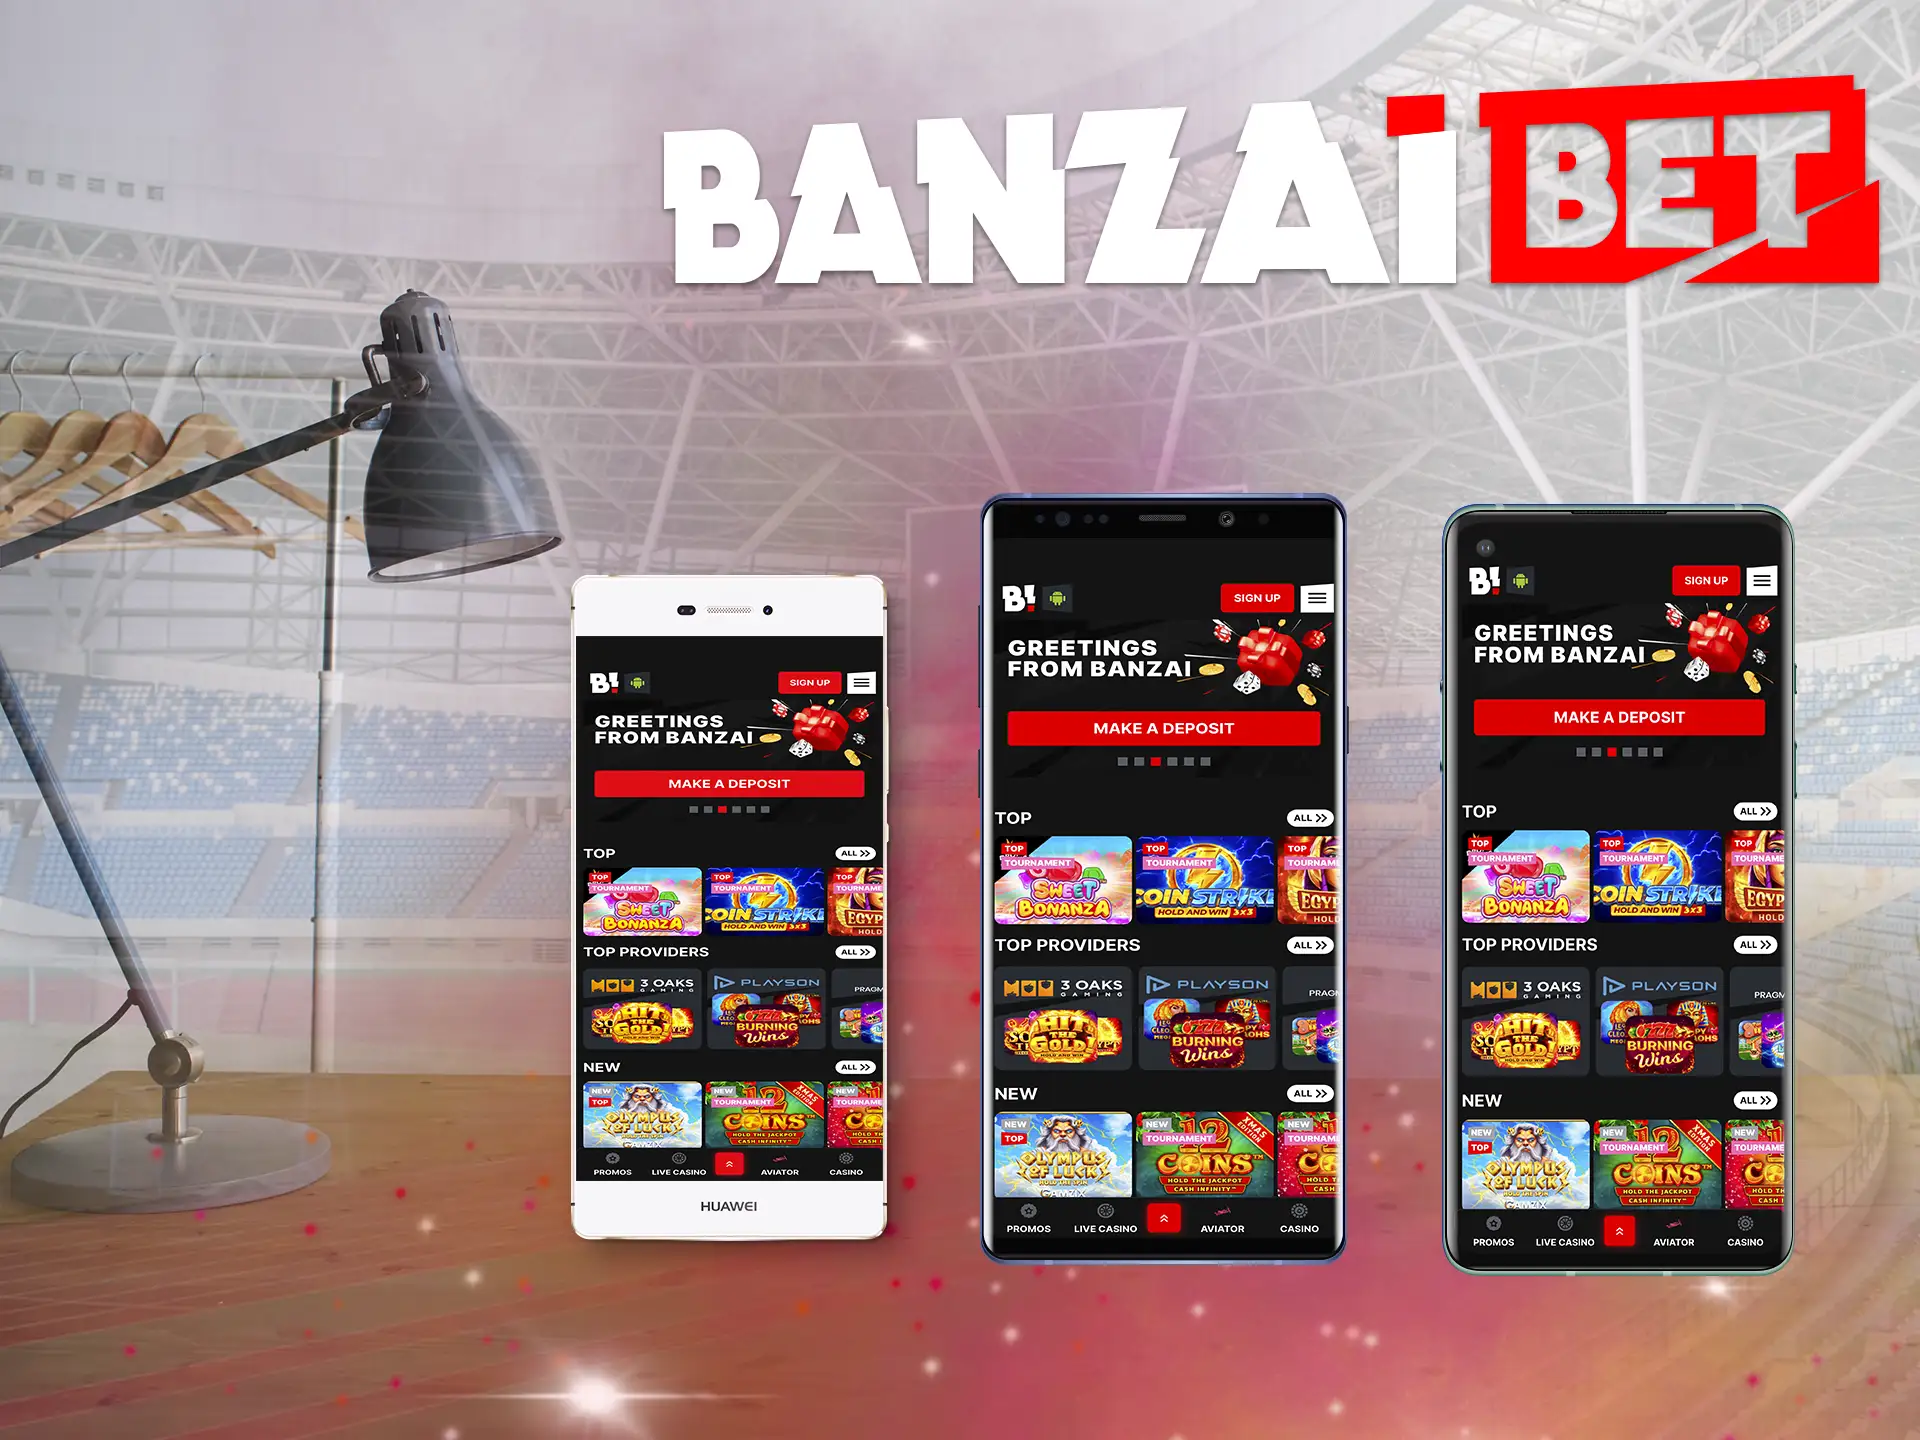 The Banzai App has been tested by the editorial team on the following platforms.